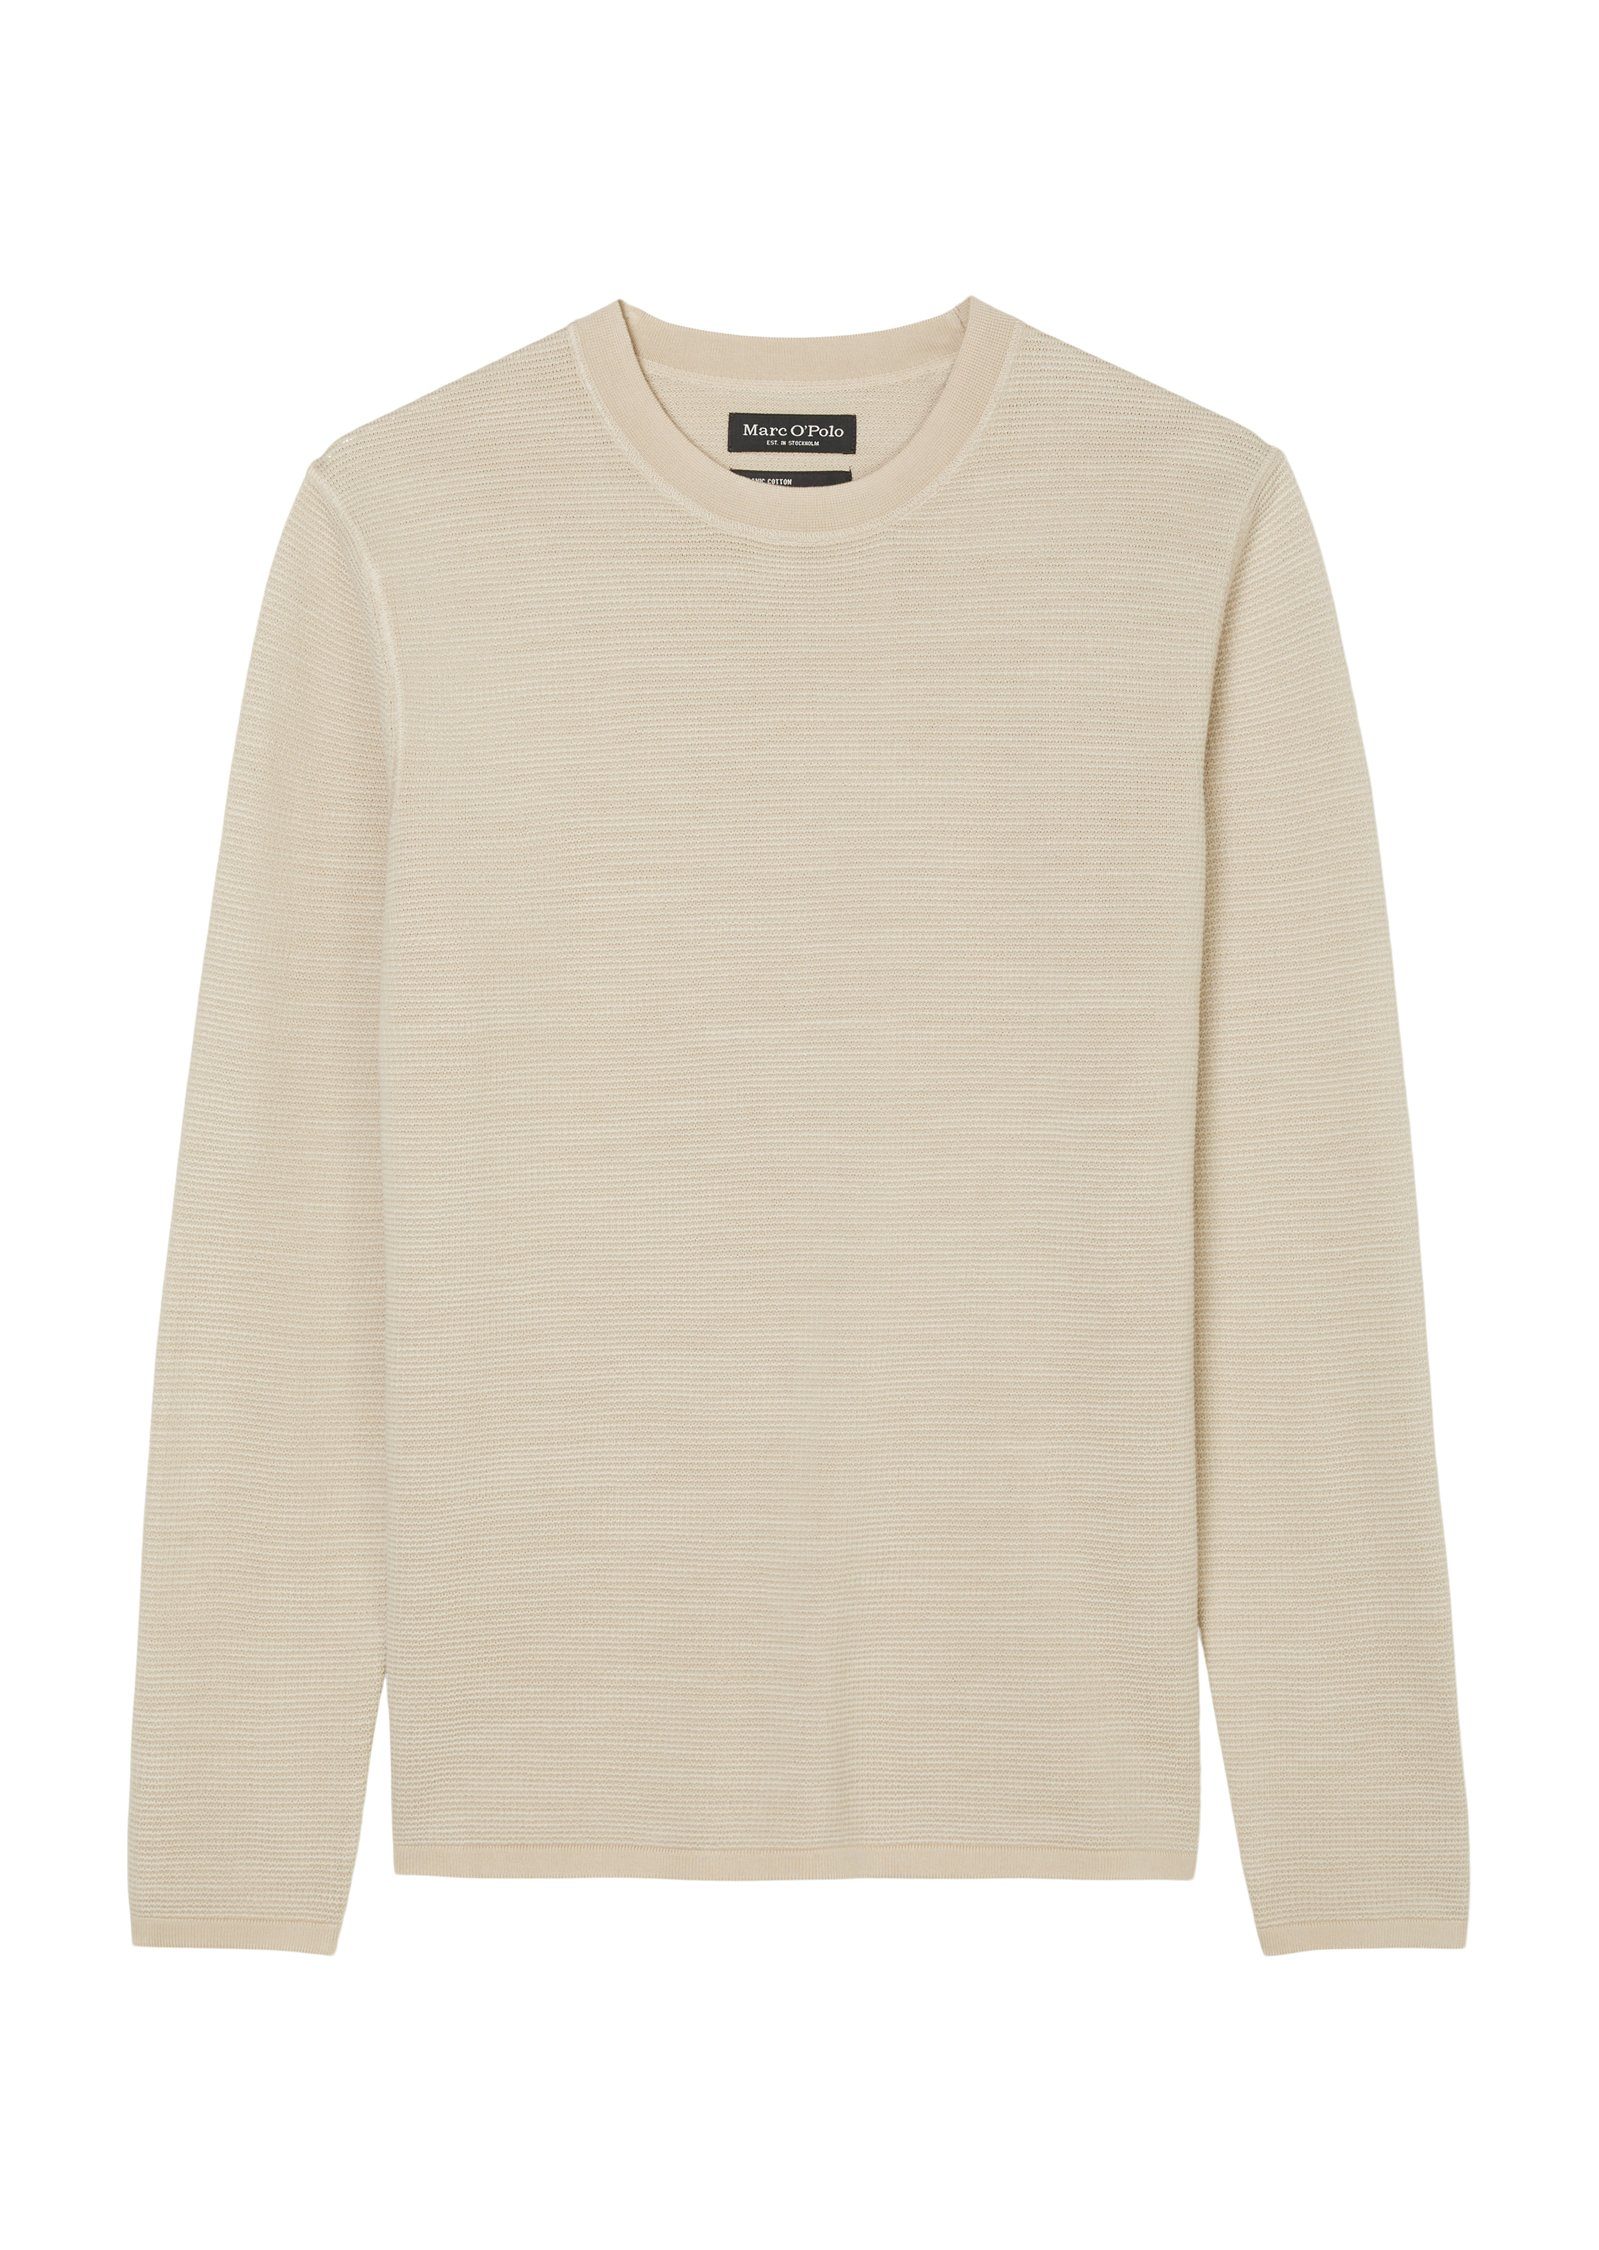 Marc neck, with Sweatshirt crew Pullover, O'Polo structure